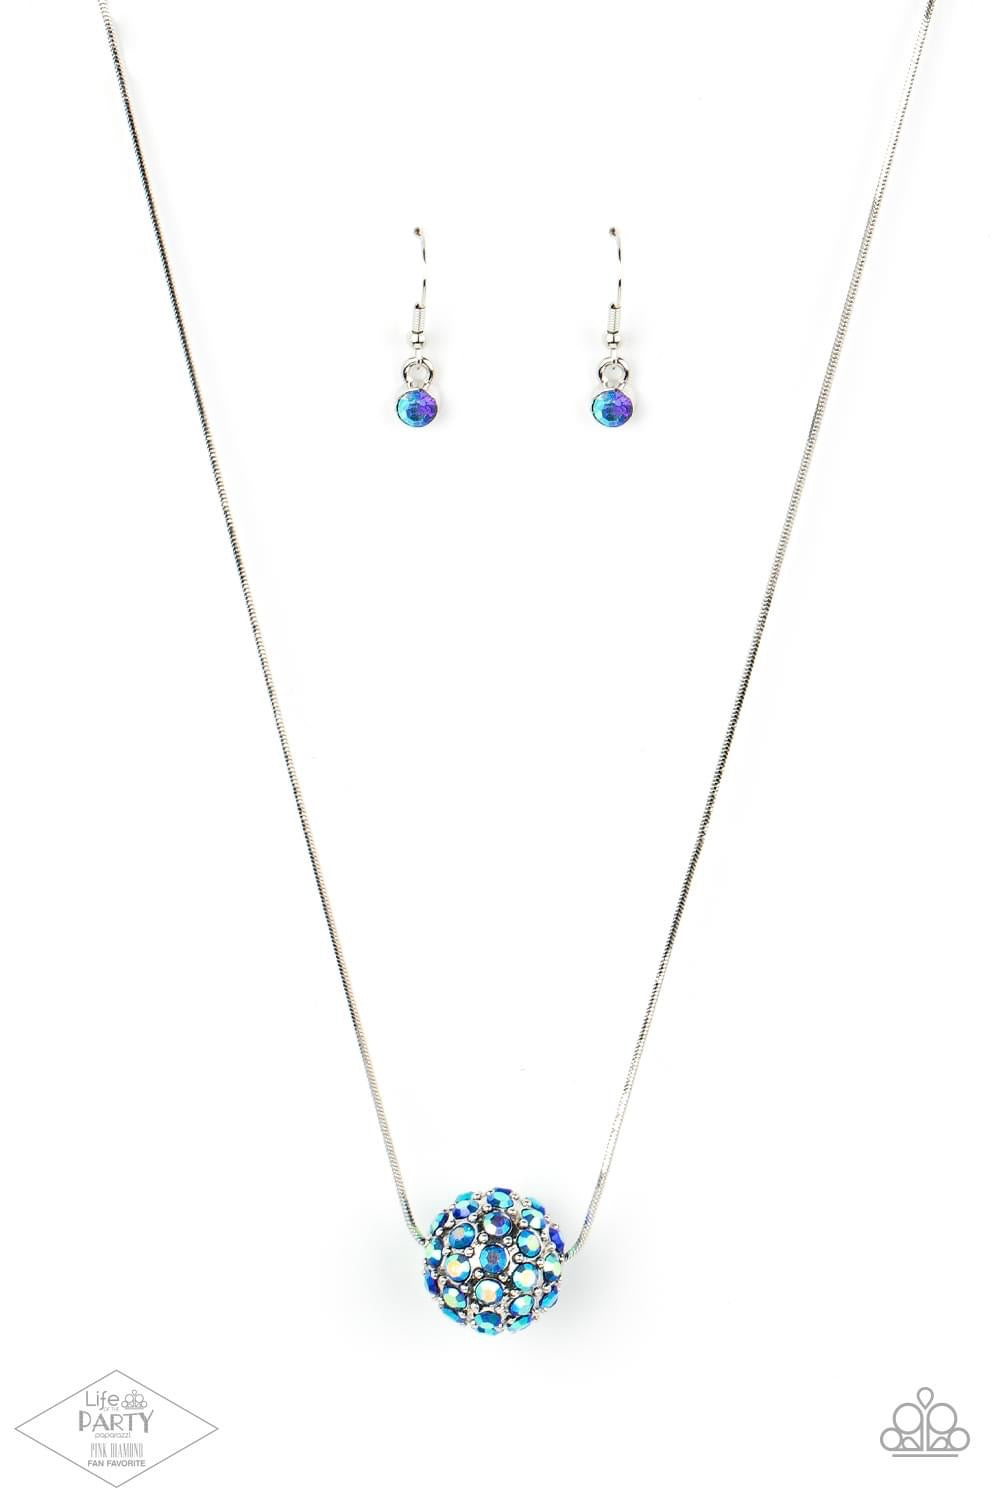 Paparazzi Come Out Of Your BOMBSHELL - Blue Necklace - Pink Diamond Life of the Party Exclusive - A Finishing Touch Jewelry